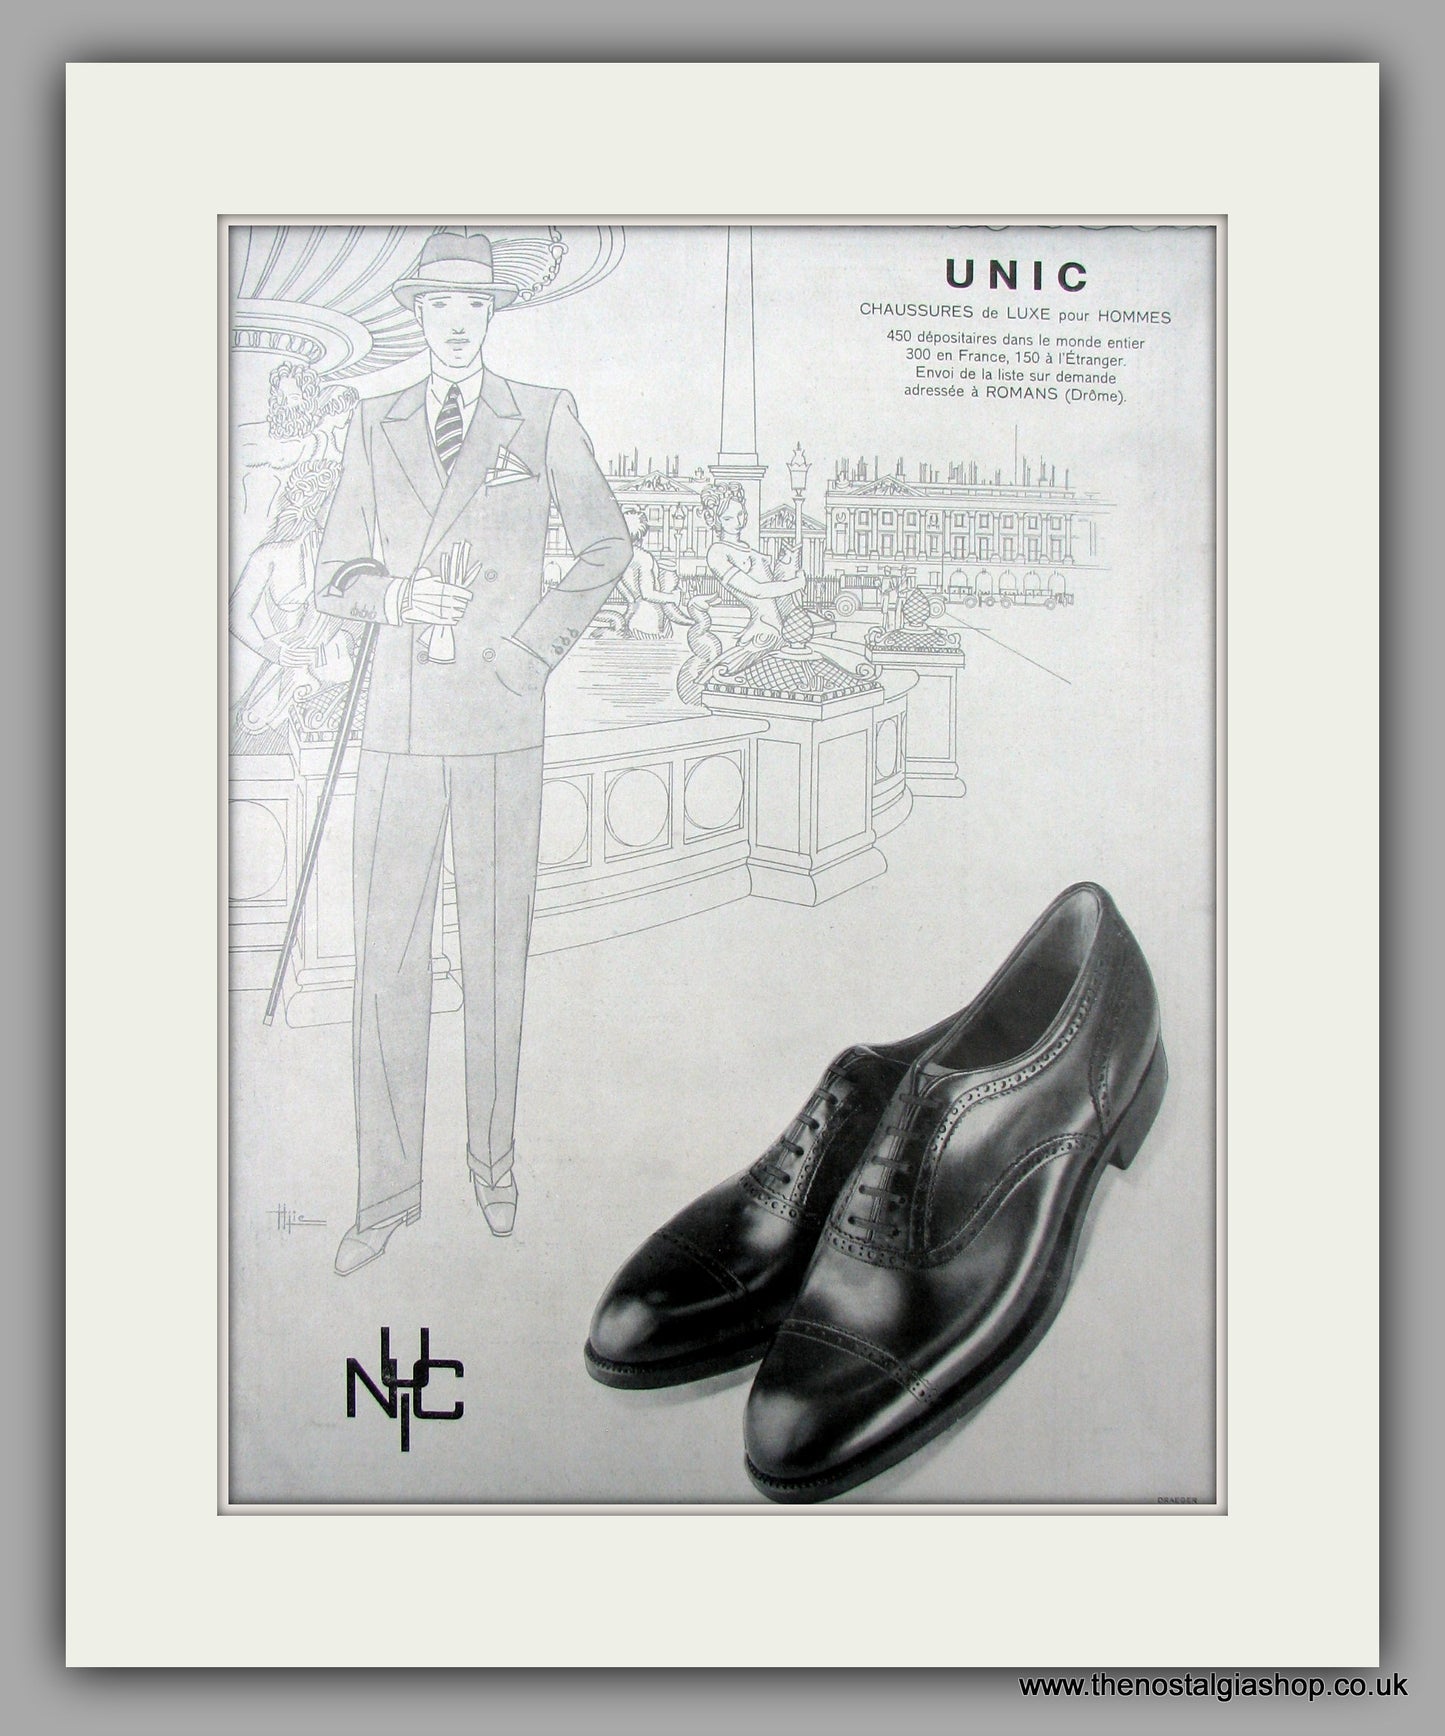 Unic Chaussures de Luxe. French Footwear.  Original Vintage Advert 1929 (ref AD10110)